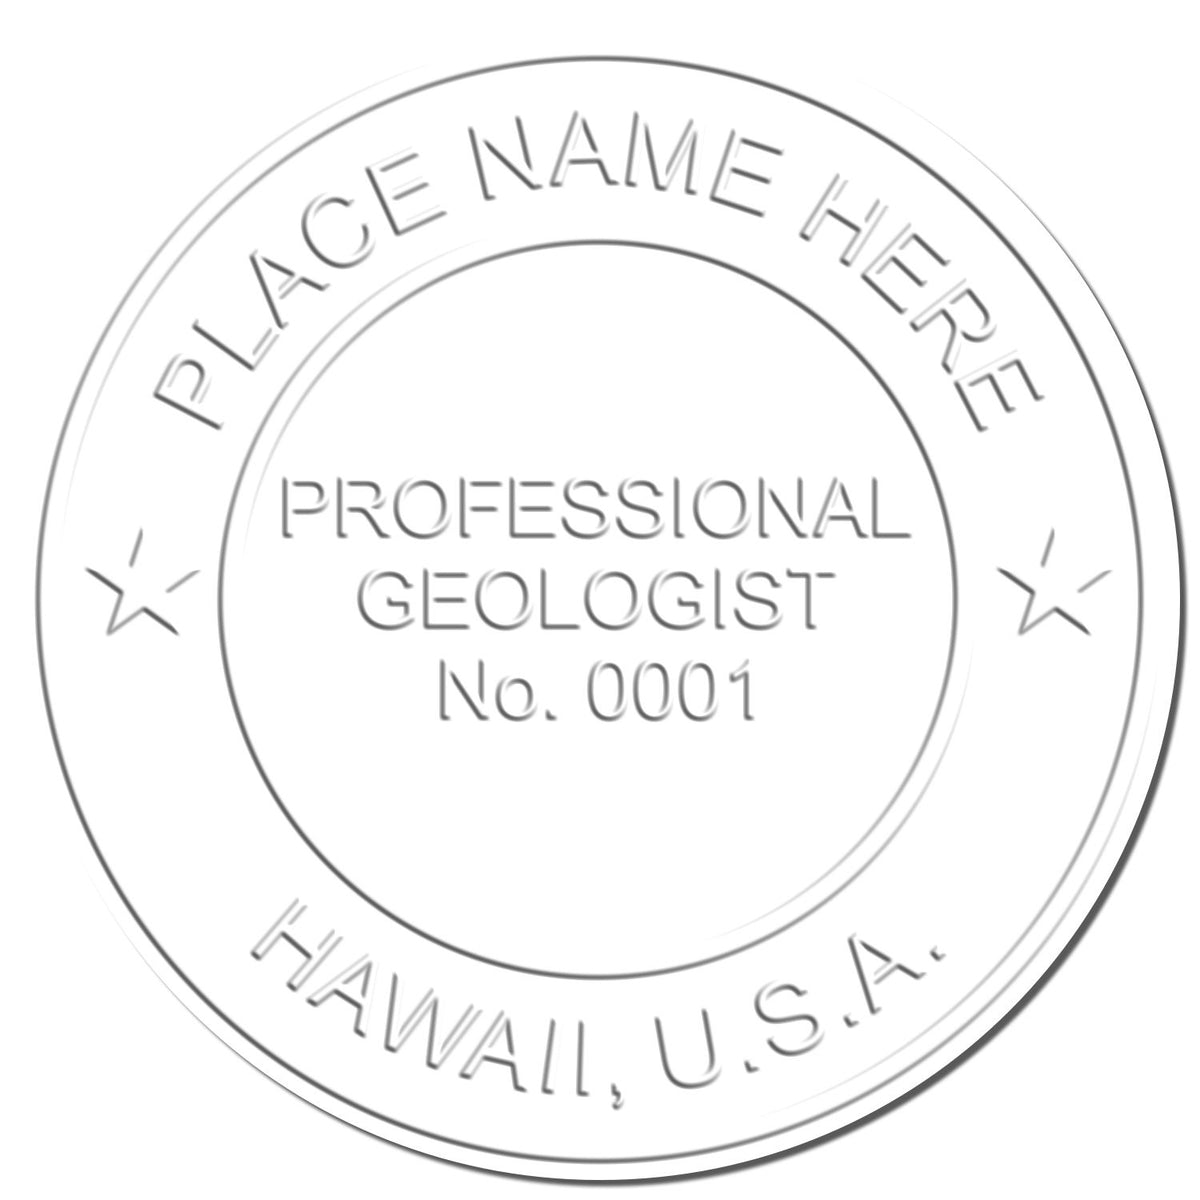 A stamped imprint of the Gift Hawaii Geologist Seal in this stylish lifestyle photo, setting the tone for a unique and personalized product.